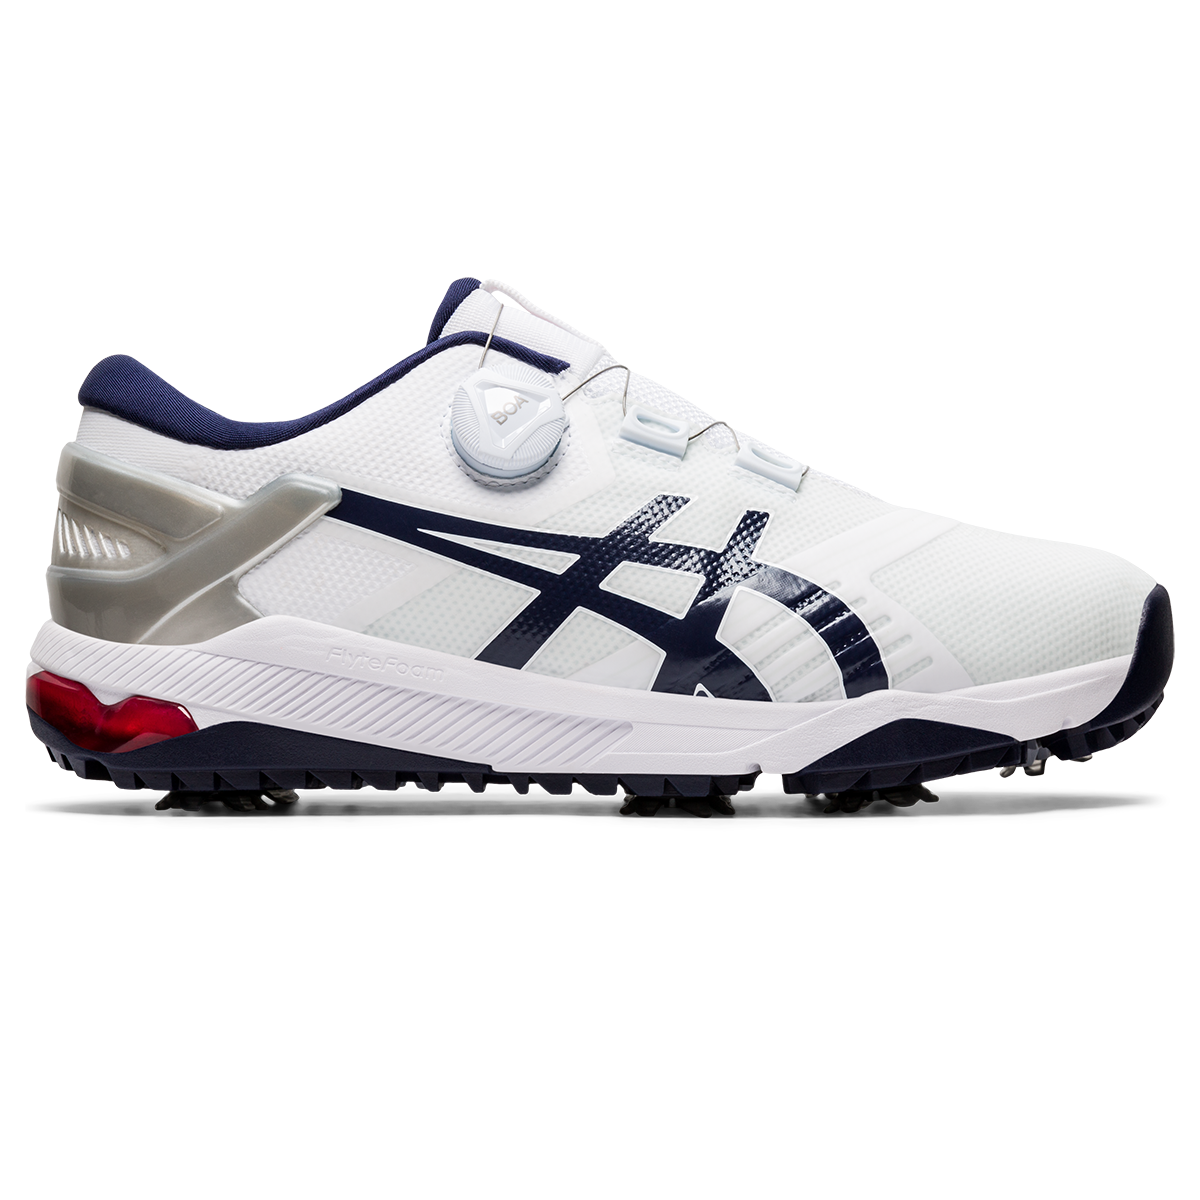 asics golf shoes for sale